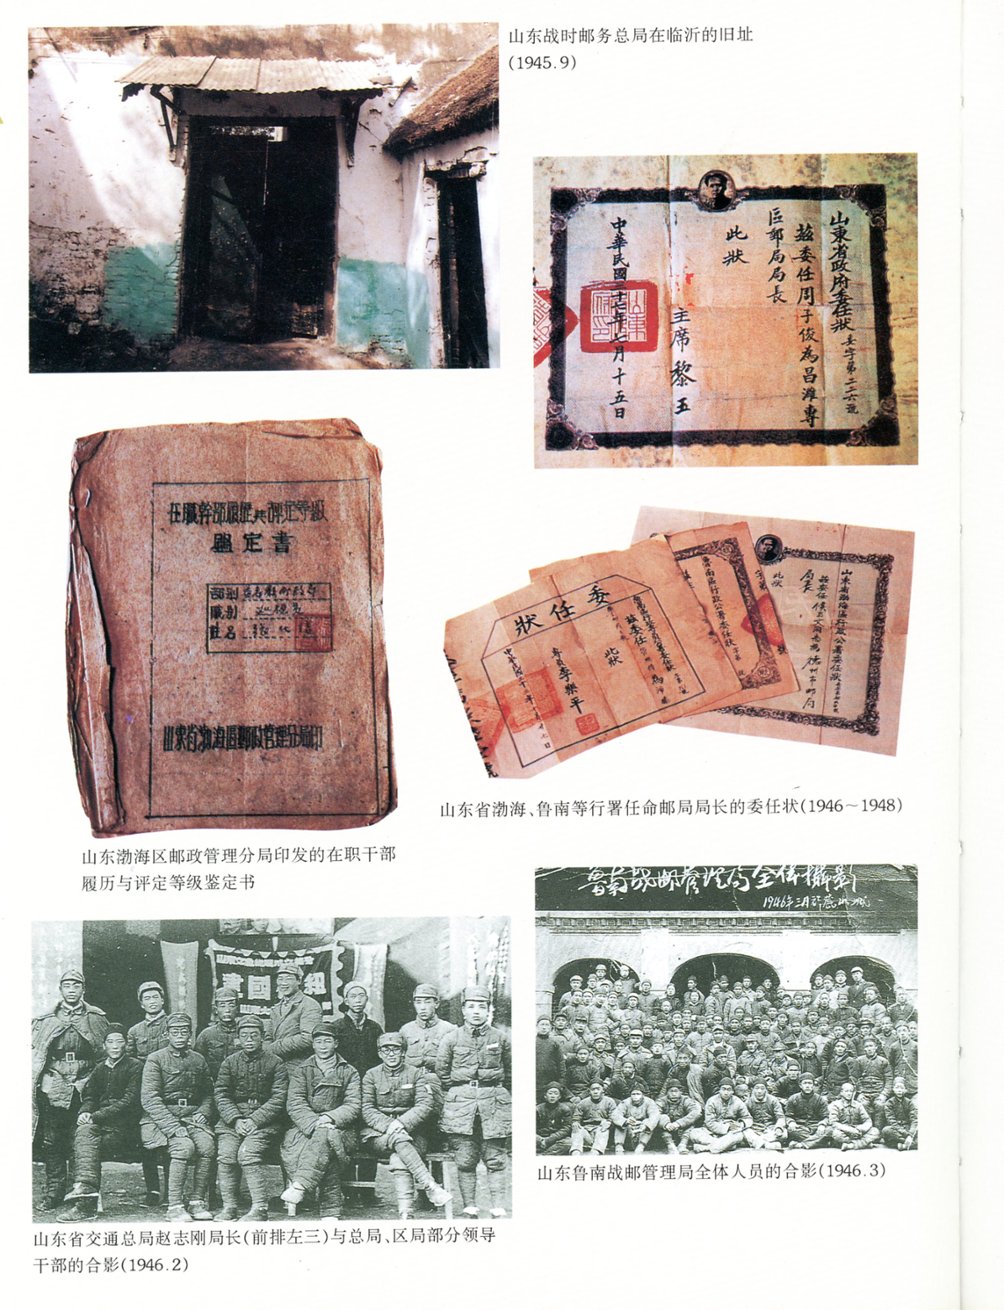 Zhongguo Jiefangqu Youzheng Tuji (A Picture Album of China's Liberated Area Posts) (1996), in Chinese, hardbound as new (1 lb 8 oz) (2 images)